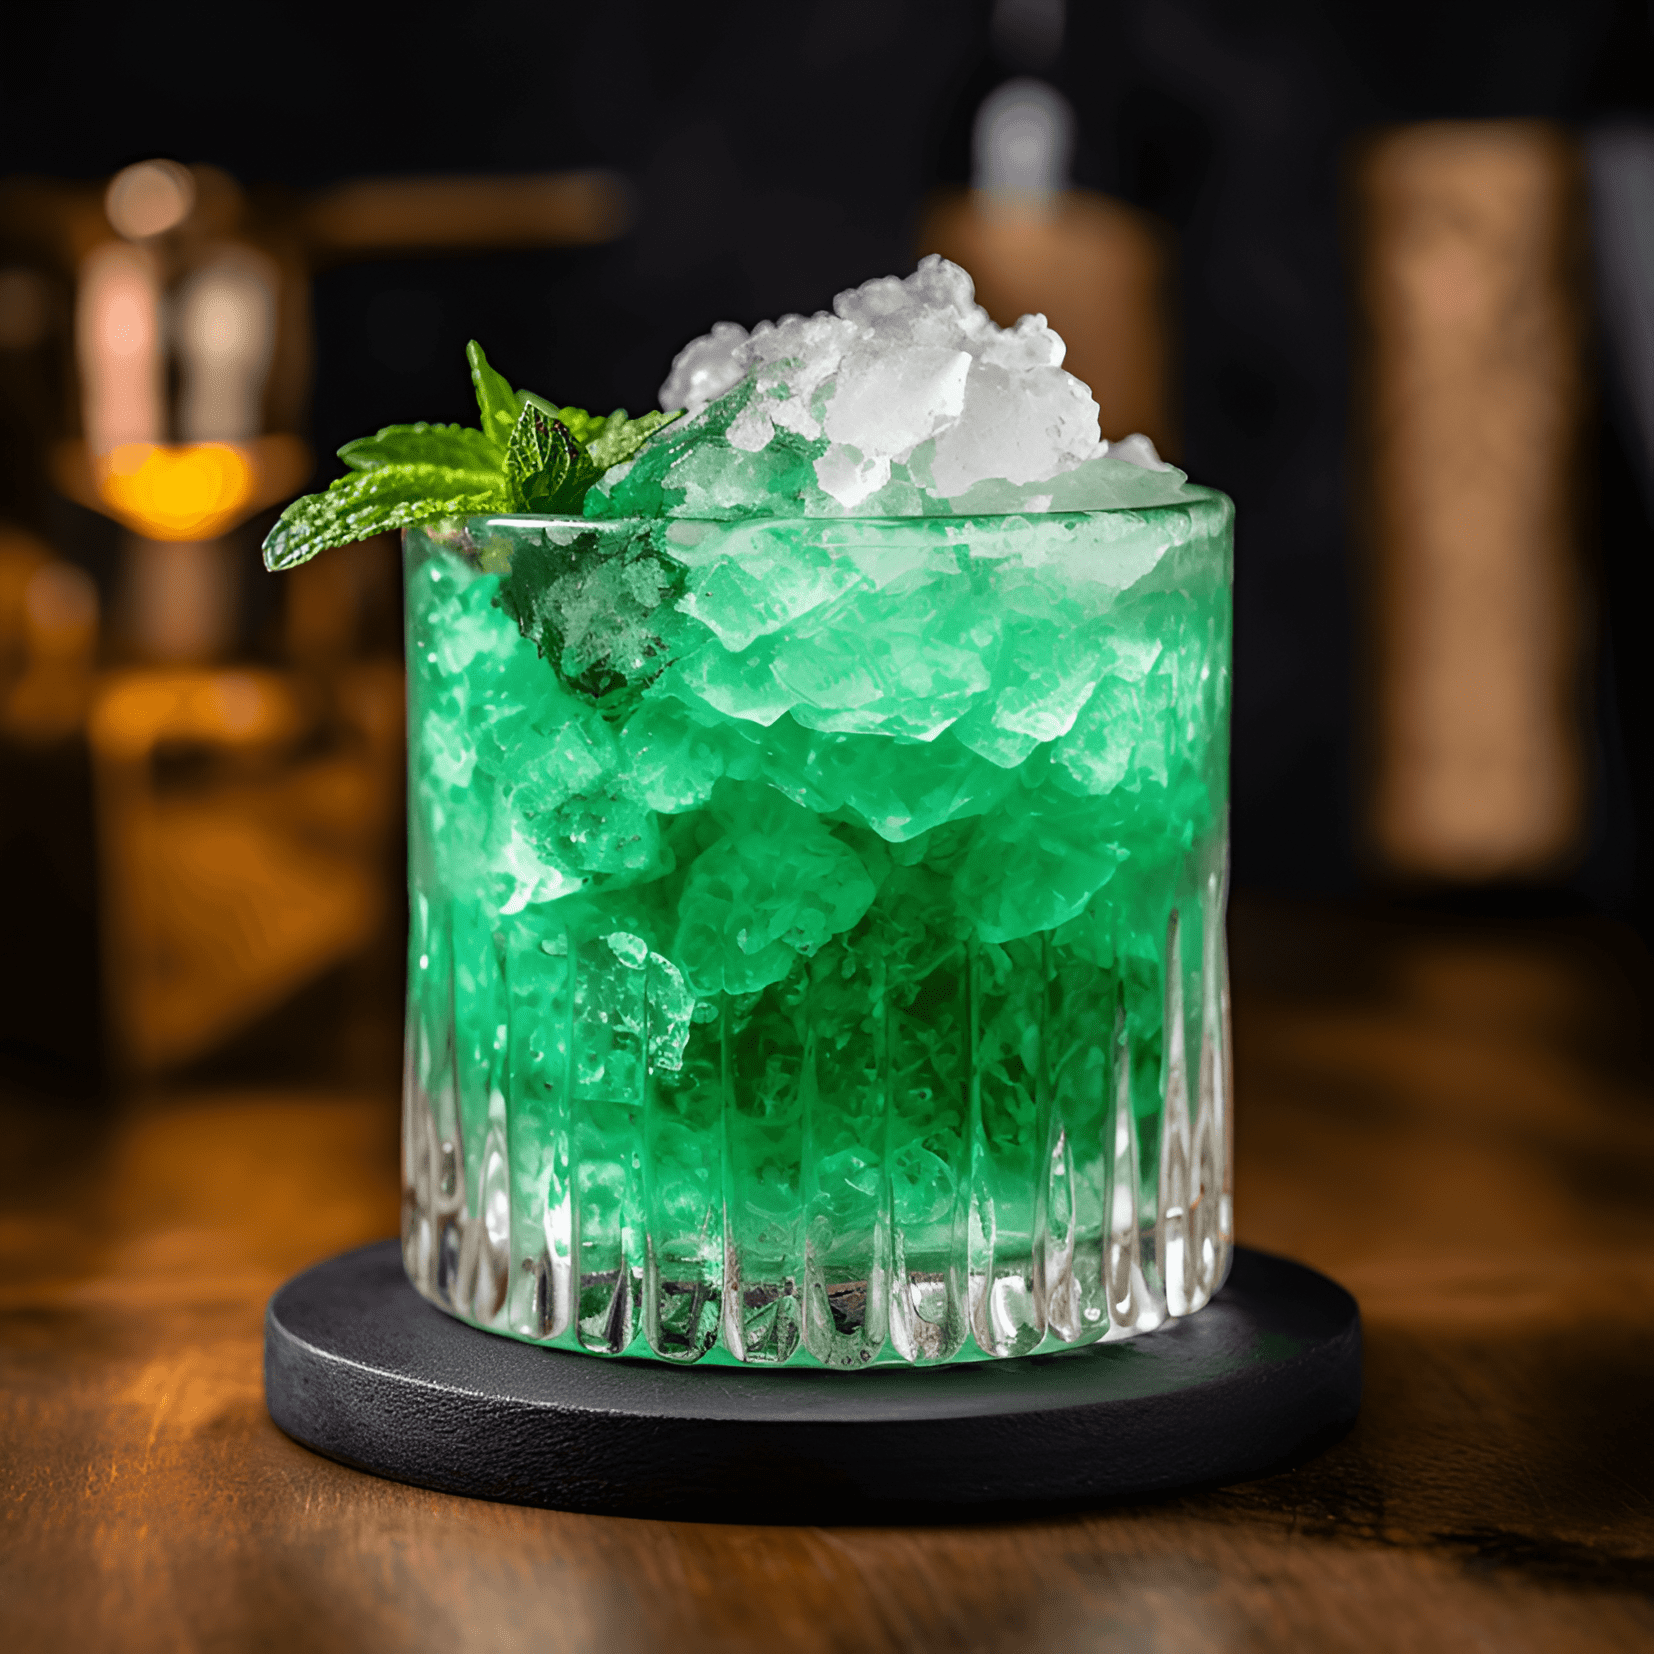 Tequila Mockingbird Cocktail Recipe - The Tequila Mockingbird is a delightful mix of sweet, sour, and slightly spicy flavors. The combination of tequila, lime juice, and green crème de menthe creates a refreshing and invigorating taste, while the jalapeño adds a subtle kick.